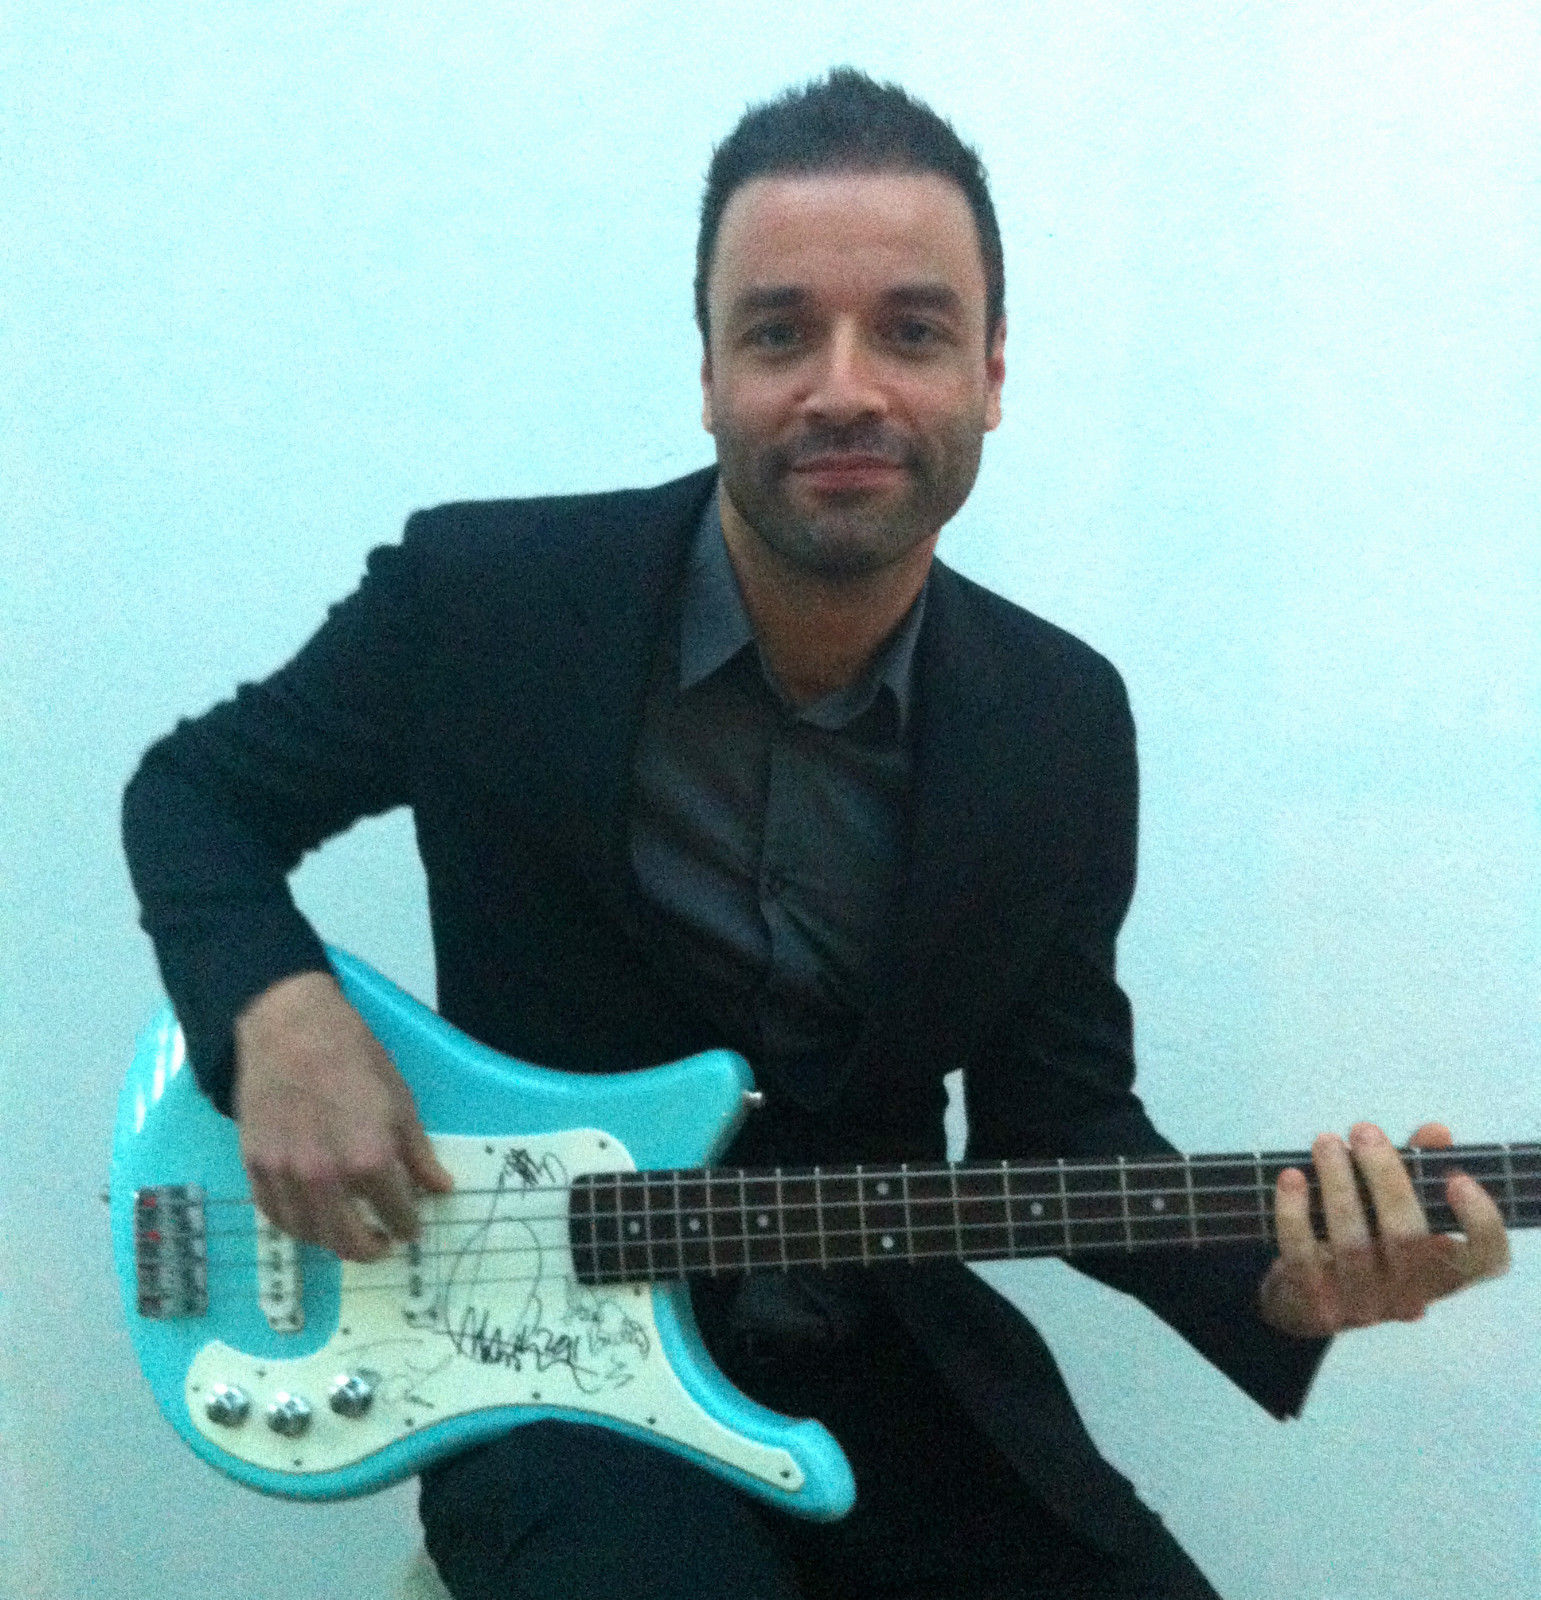 Your Chance To Win A Rare Bass Guitar Signed By Chris Wolstenholme Of Muse And Others Musomuso Com